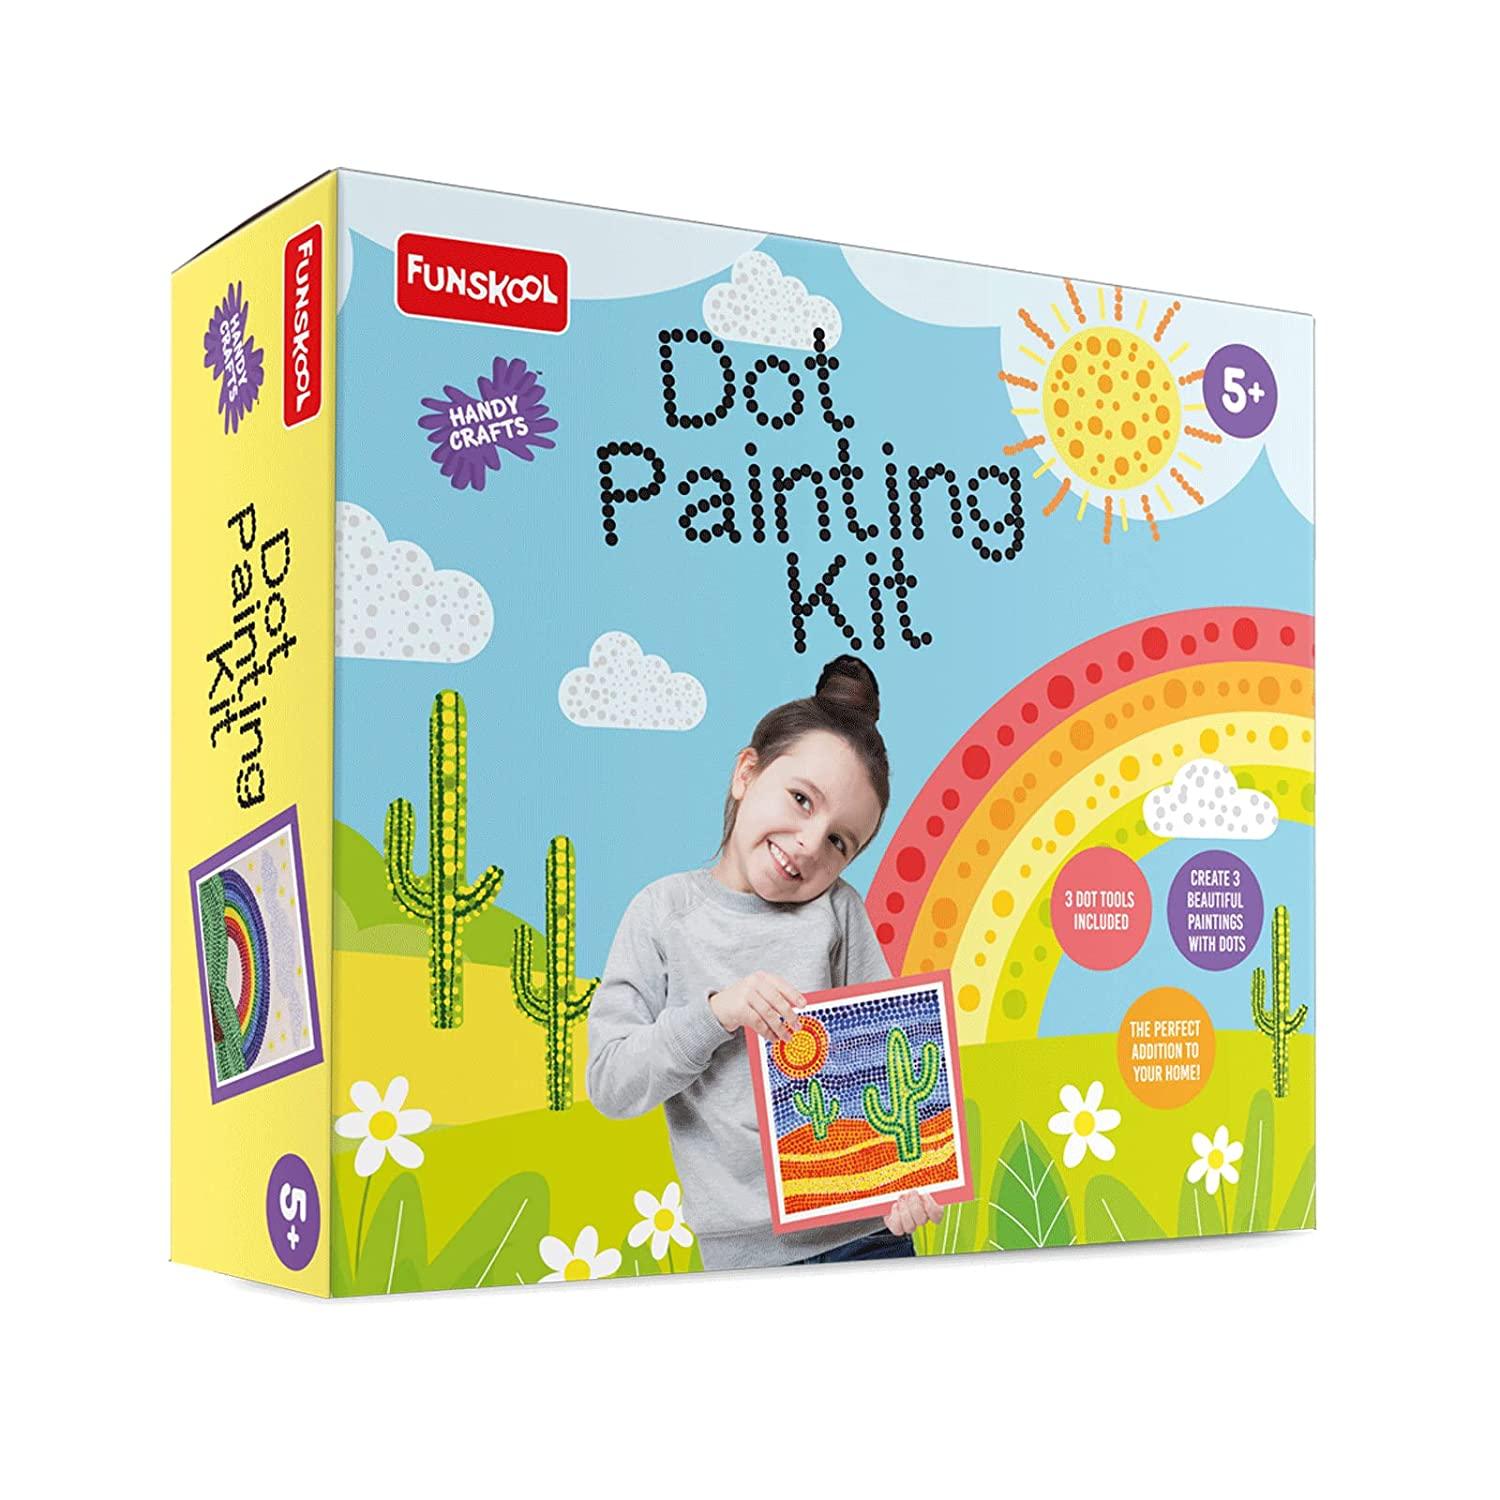 Funskool Funskool Handycrafts Dot Painting Learn The Art of Painting with dots Activity Kit for Ages 5+